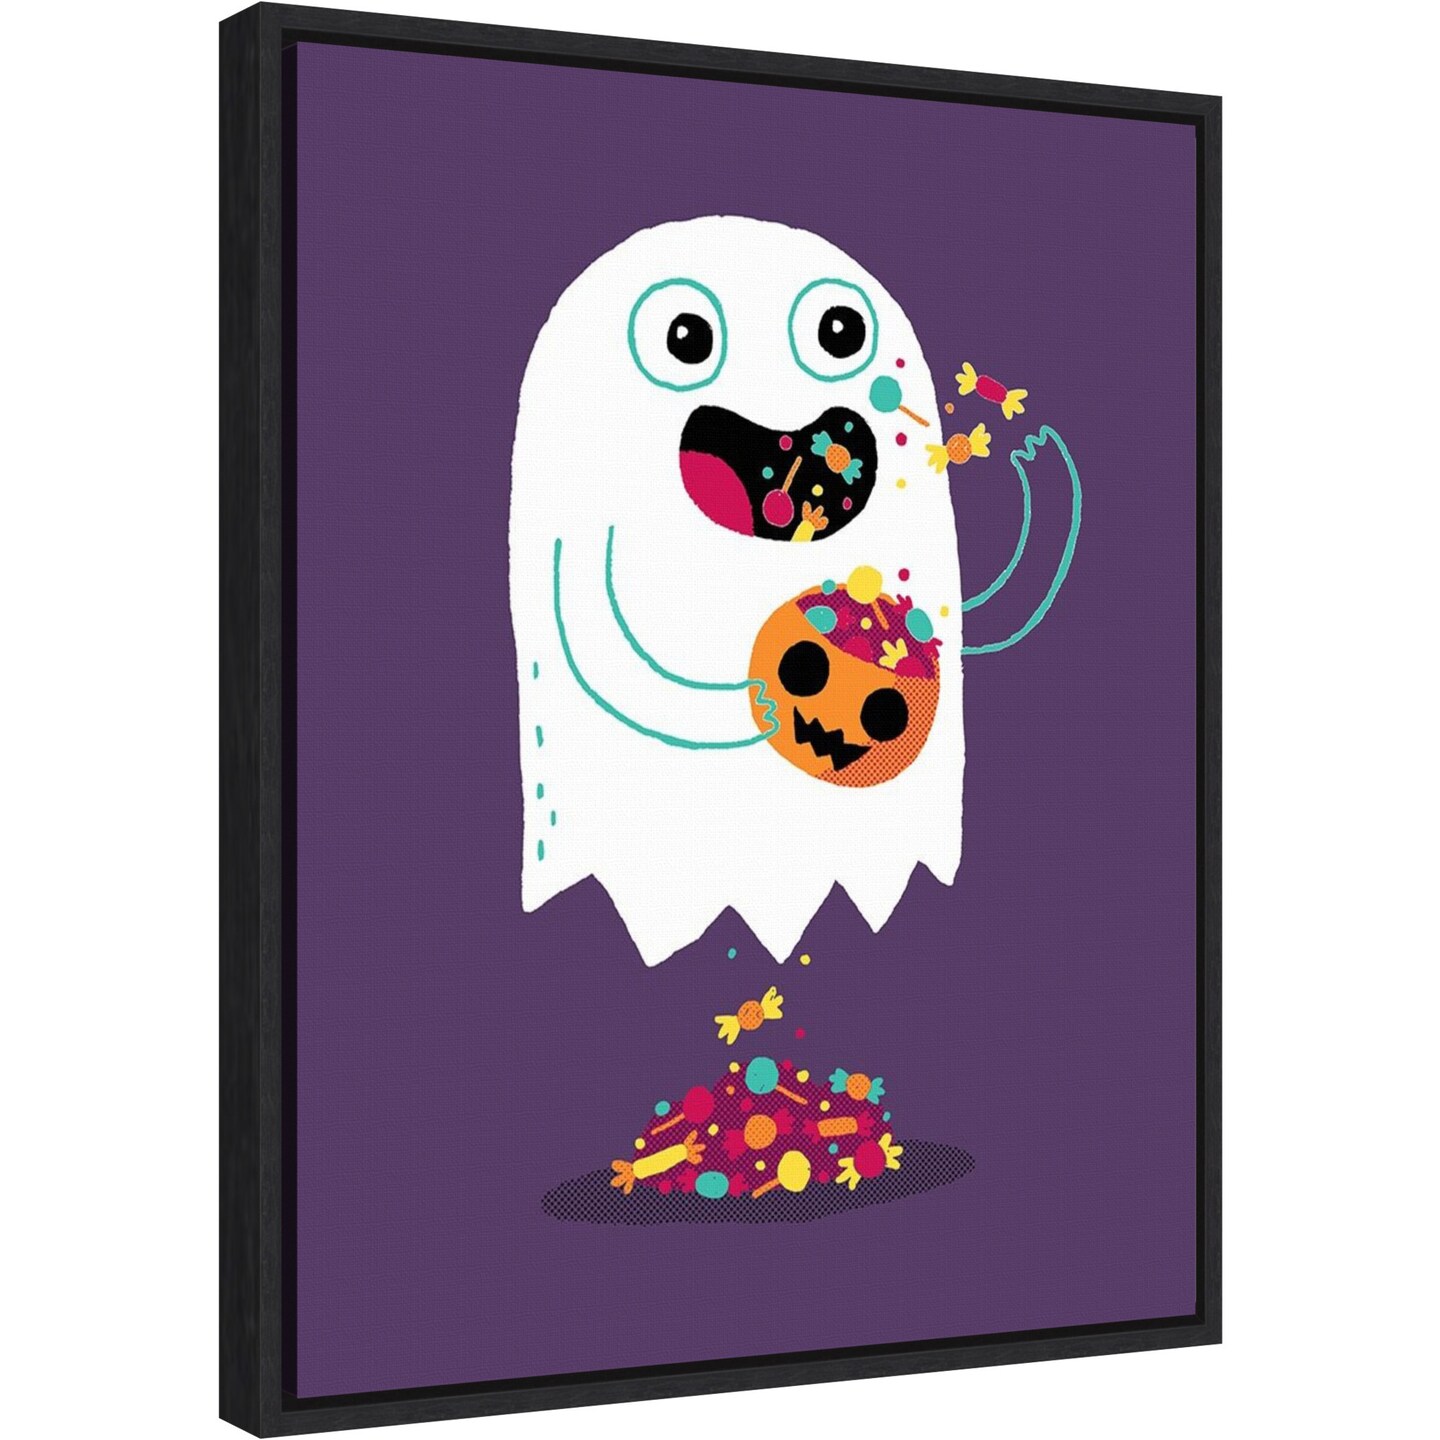 Ghost Candy by Michael Buxton 16-in. W x 20-in. H. Canvas Wall Art Print Framed in Black